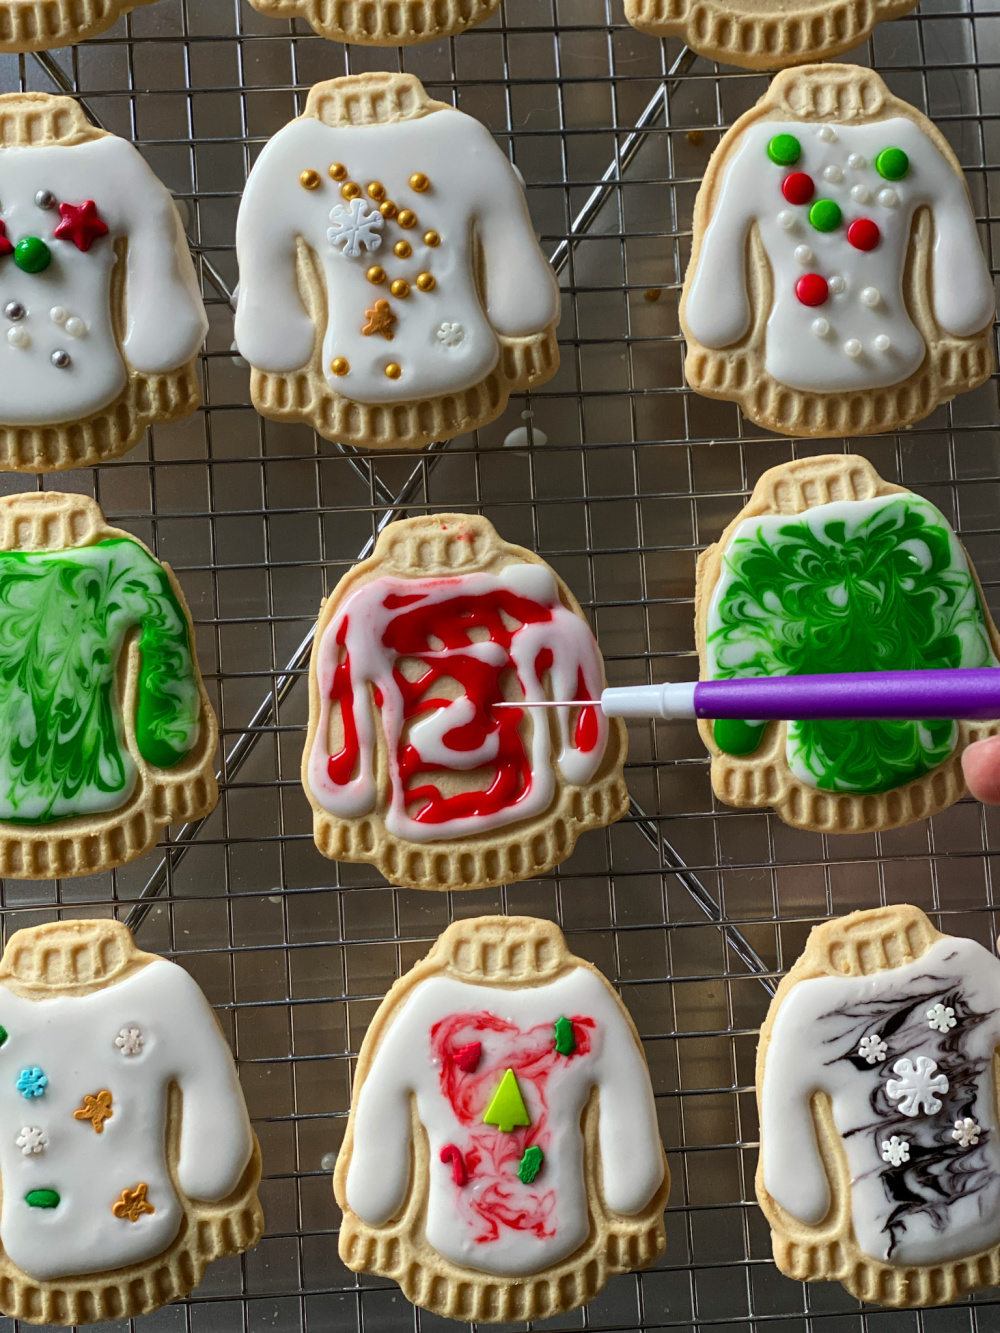 Showing different ways to decorate the ugly sweater cookies